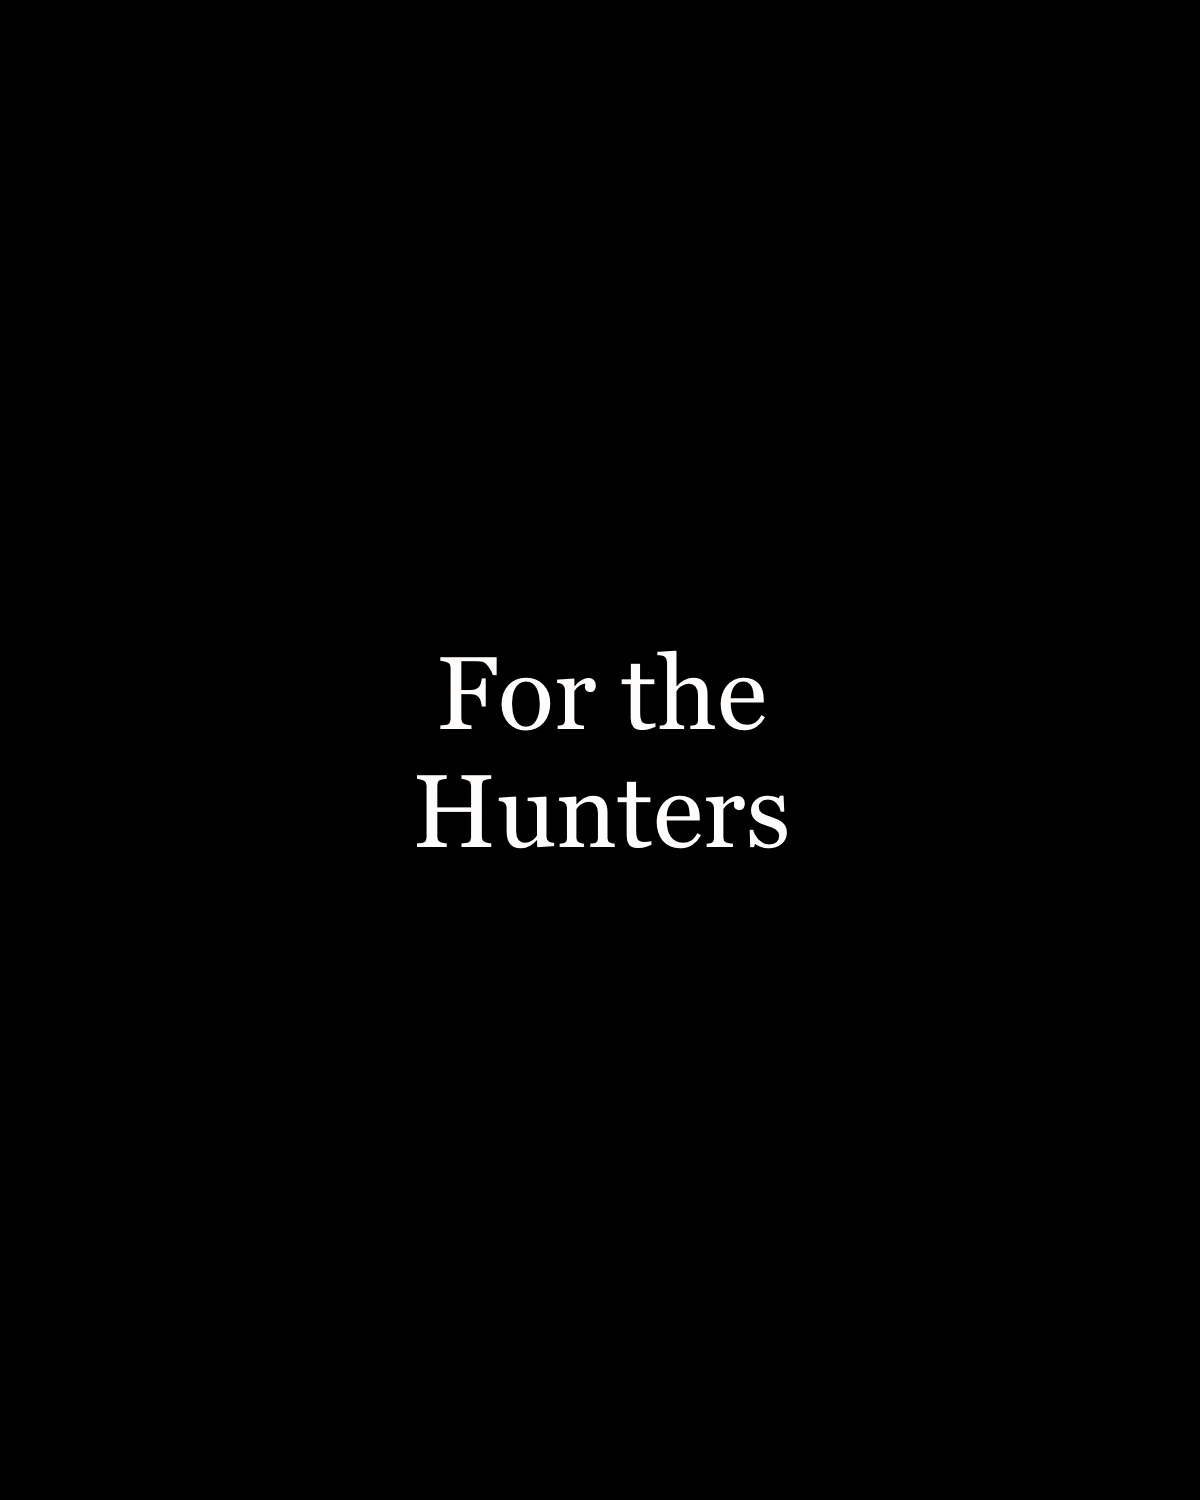 For the hunter